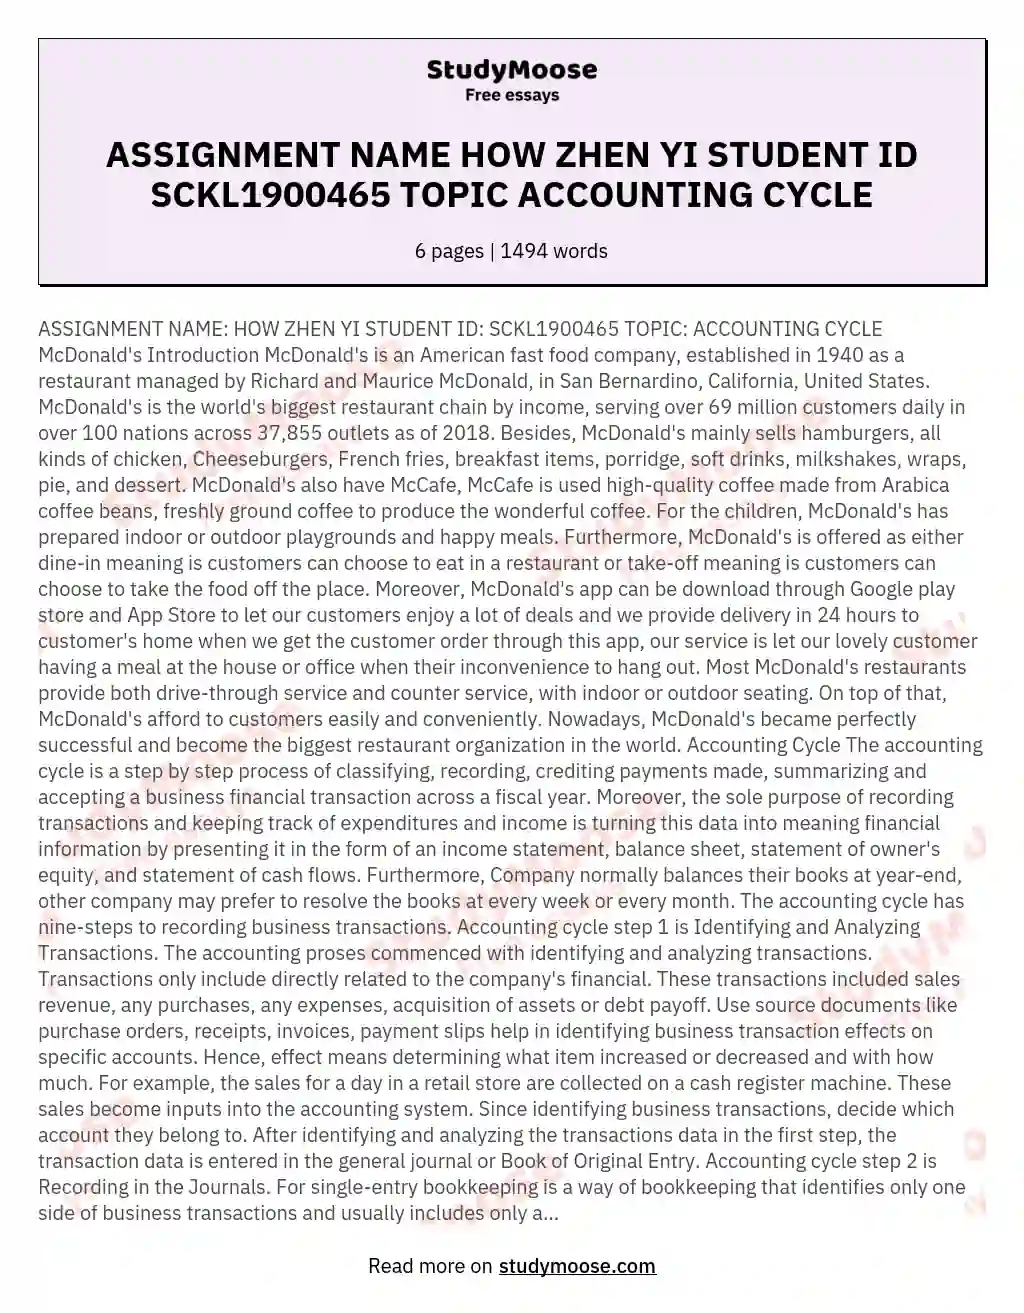 ASSIGNMENT NAME HOW ZHEN YI STUDENT ID SCKL1900465 TOPIC ACCOUNTING CYCLE